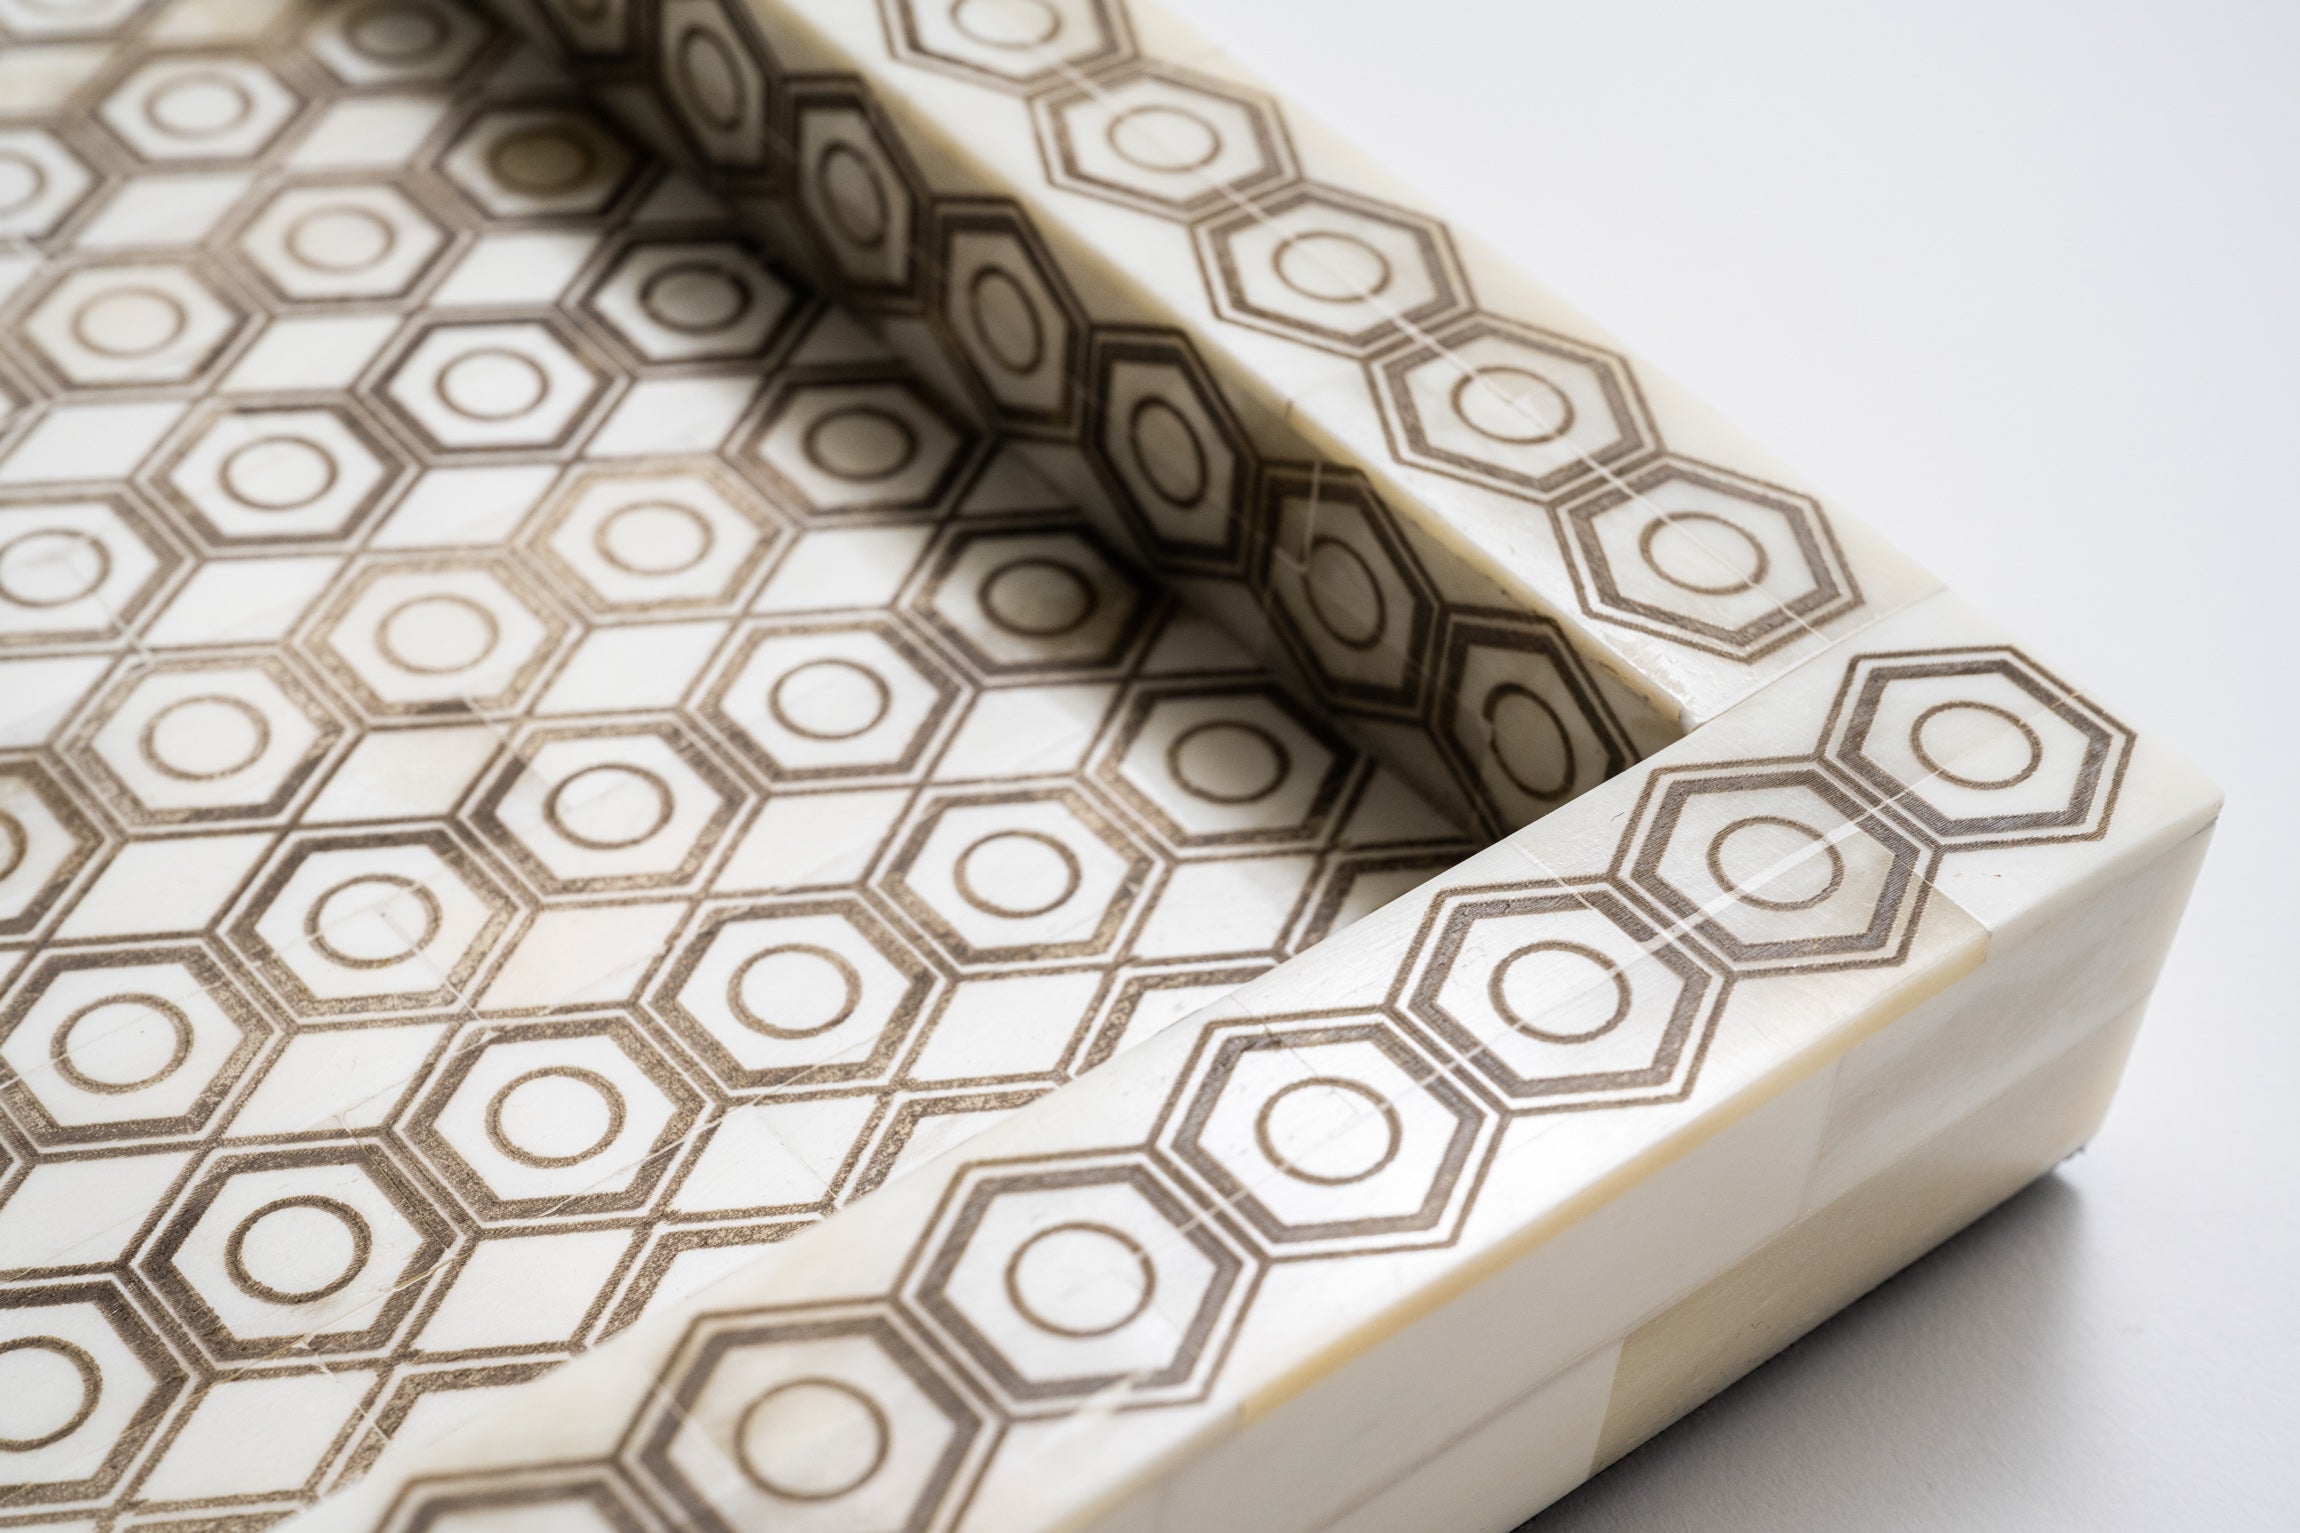 Rectangular bone inlay tray with its honeycomb shaped etchings